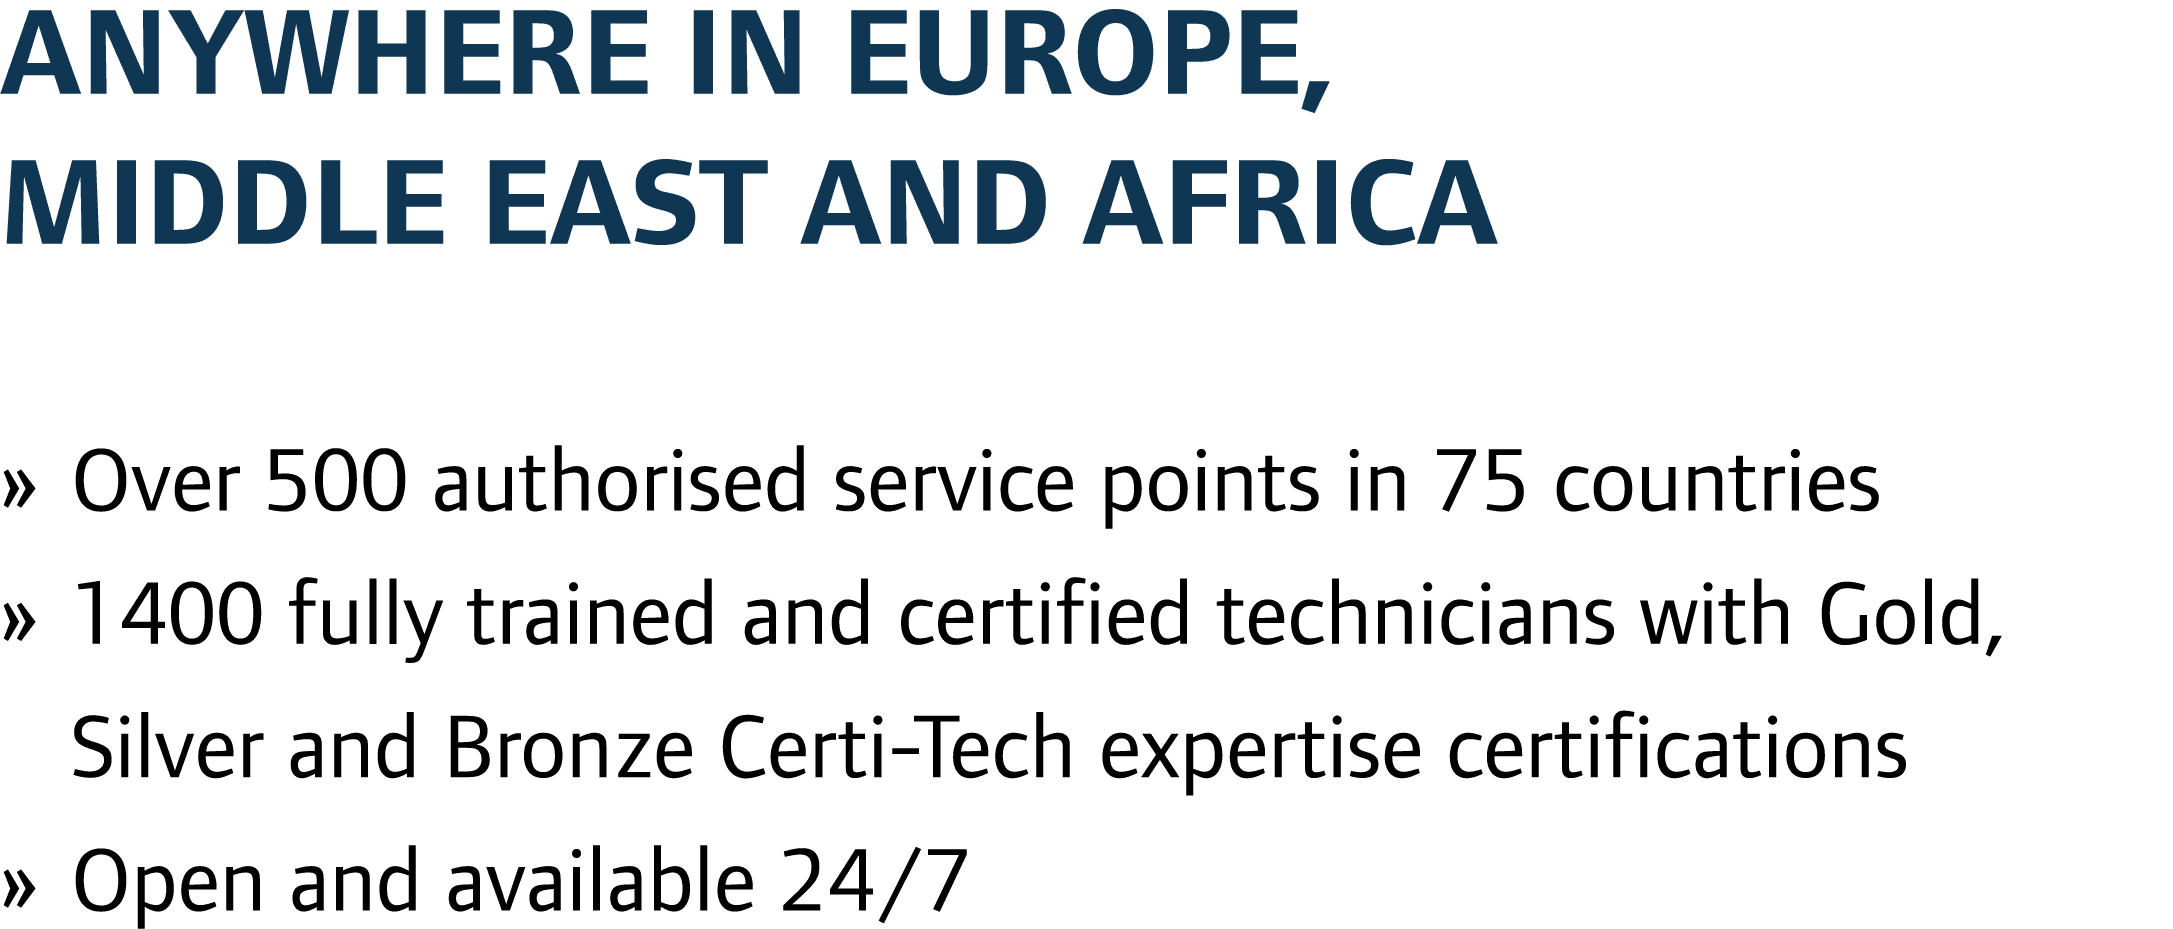 Anywhere in Europe, Middle East and Africa » Over 500 authorised service points in 75 countries » 1400 fully trained ...